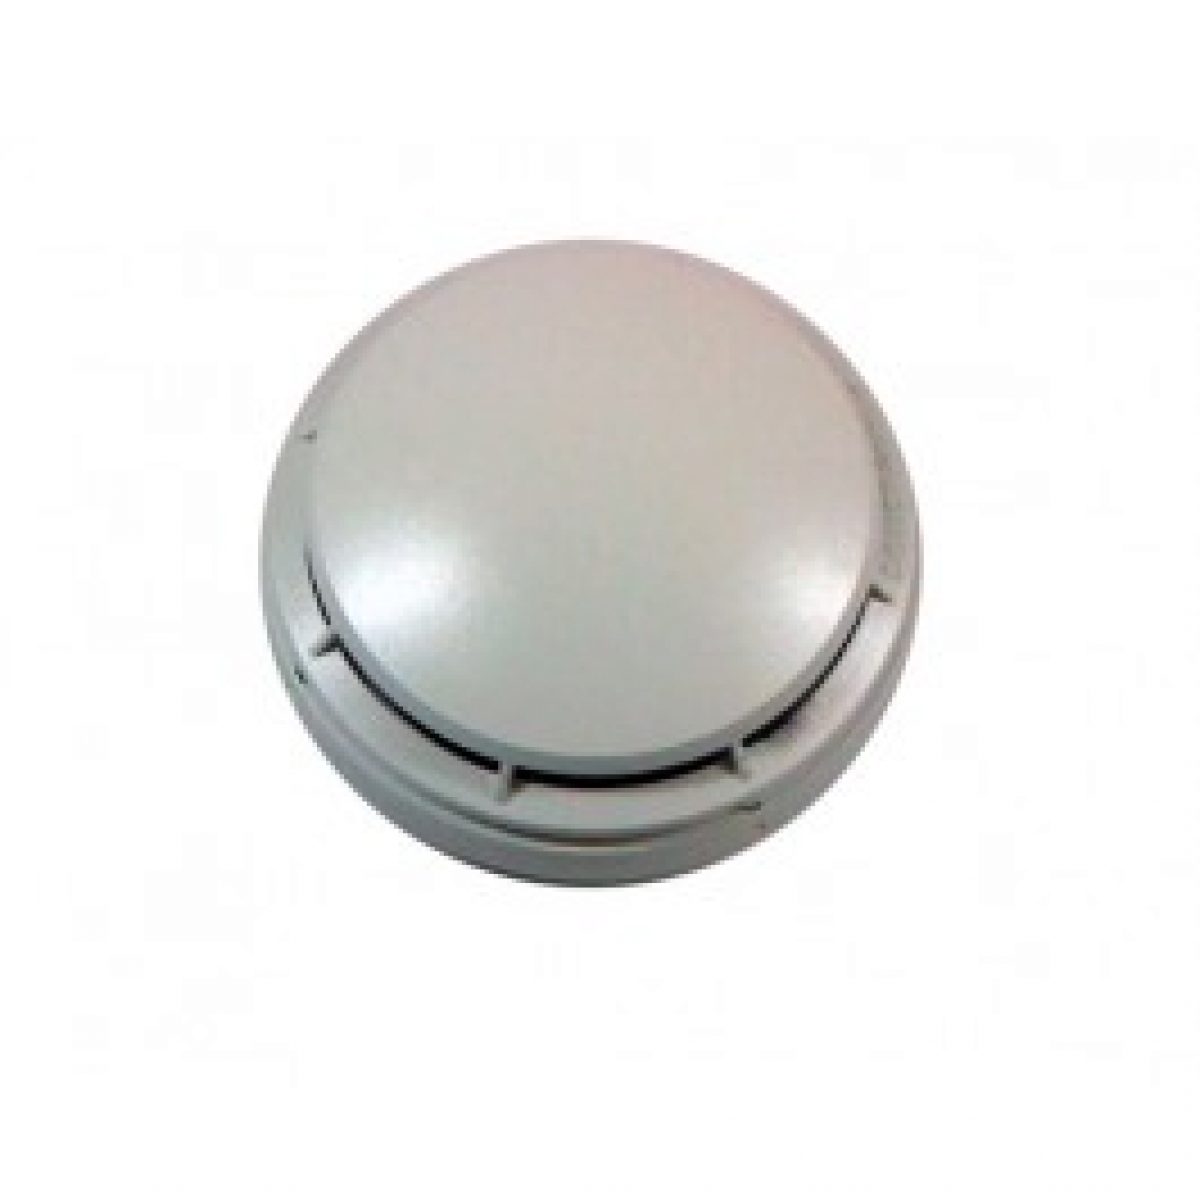 Fire Alarm. Details about   Simplex 4098-9714 Smoke Detector Head Only 